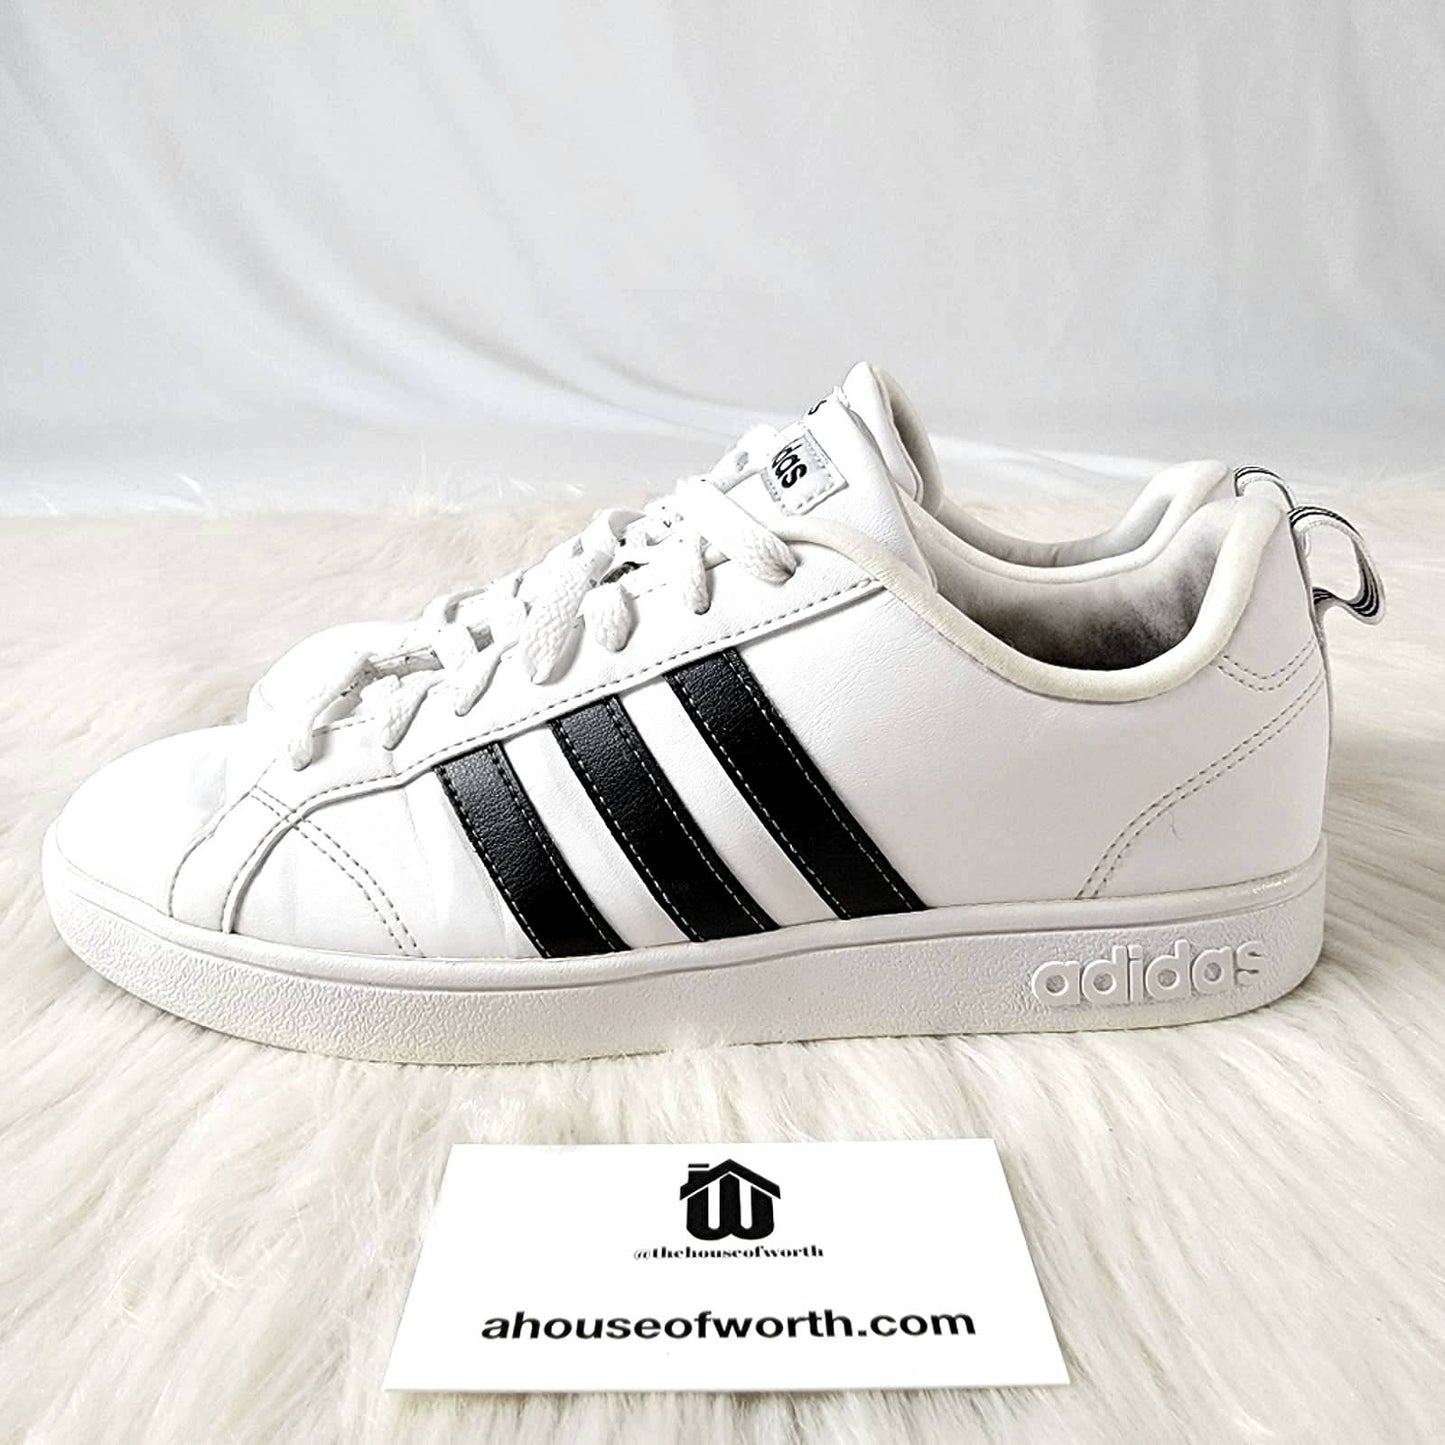 Adidas Grand Court Classic Sneakers - 8.5/10